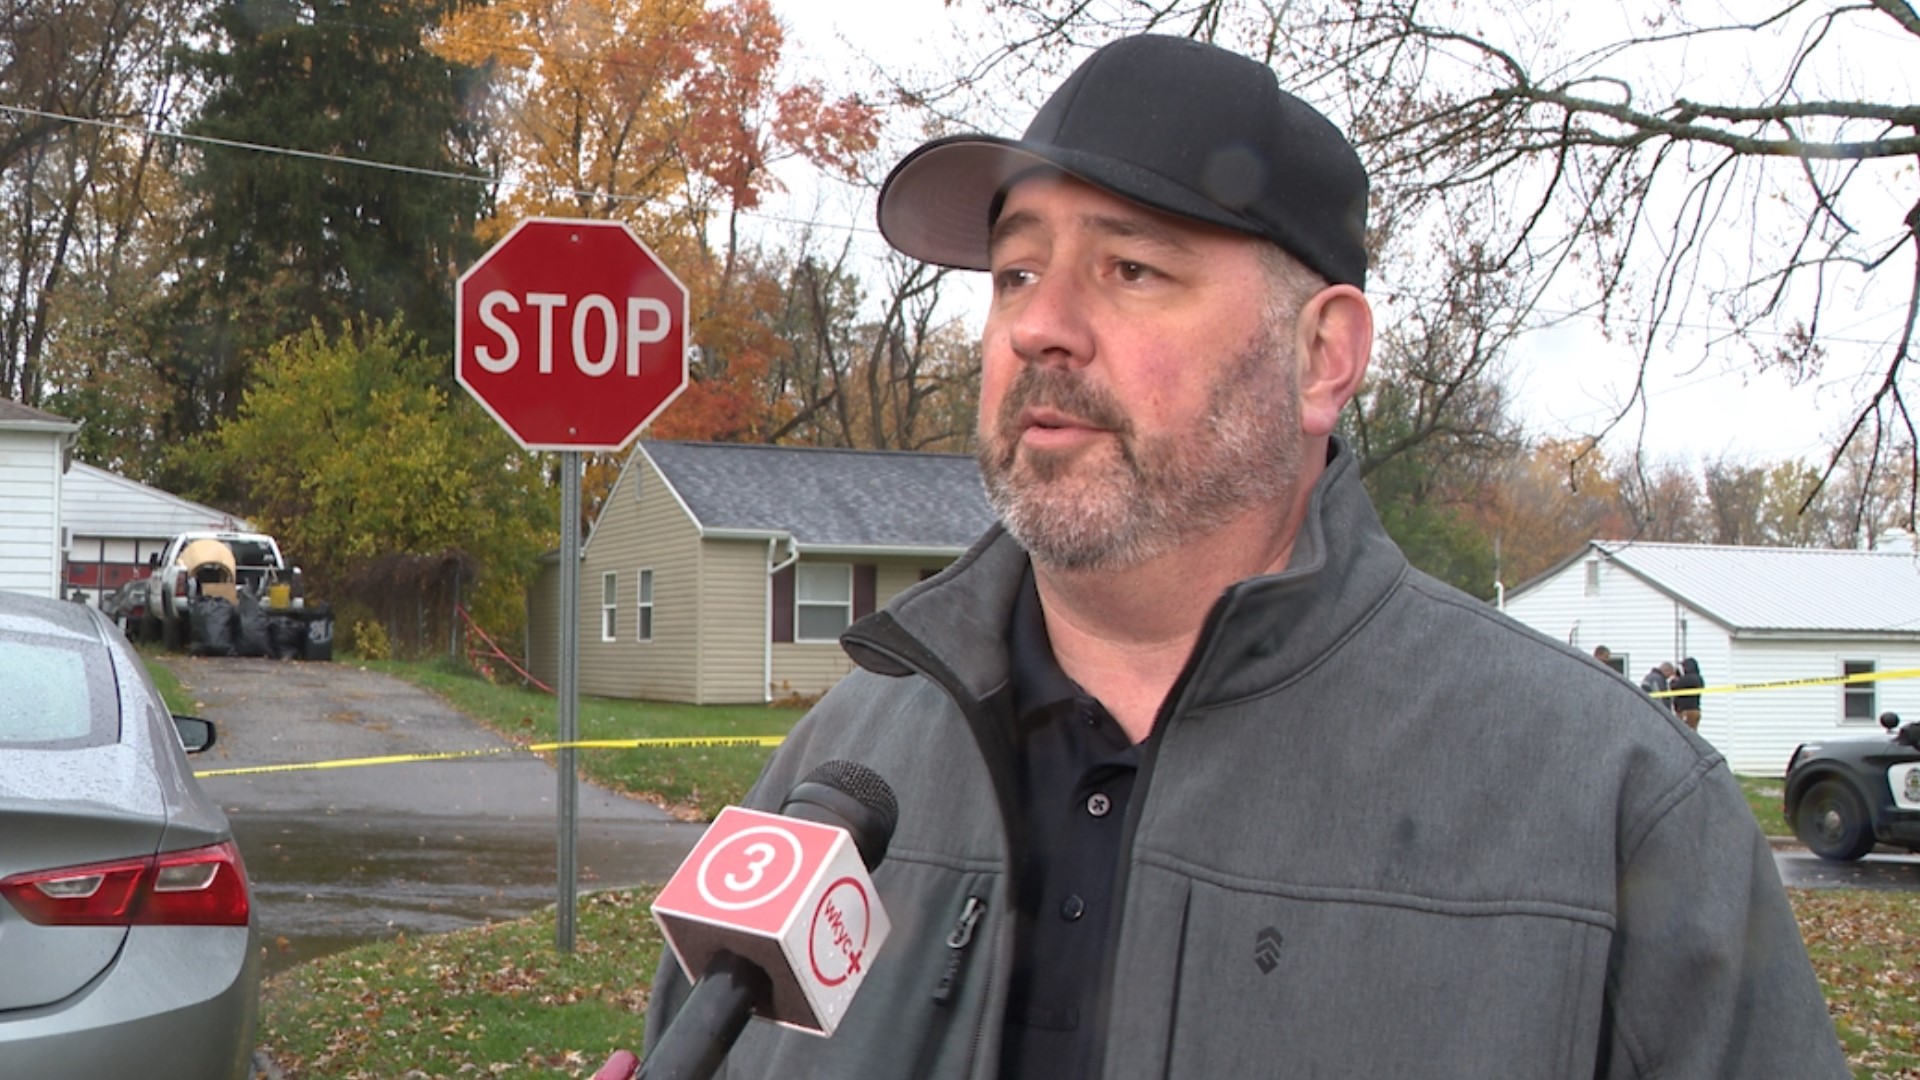 Mansfield police Lt. Robert Skropits spoke with 3News to give updates on six teenagers shot at a party on Friday night.